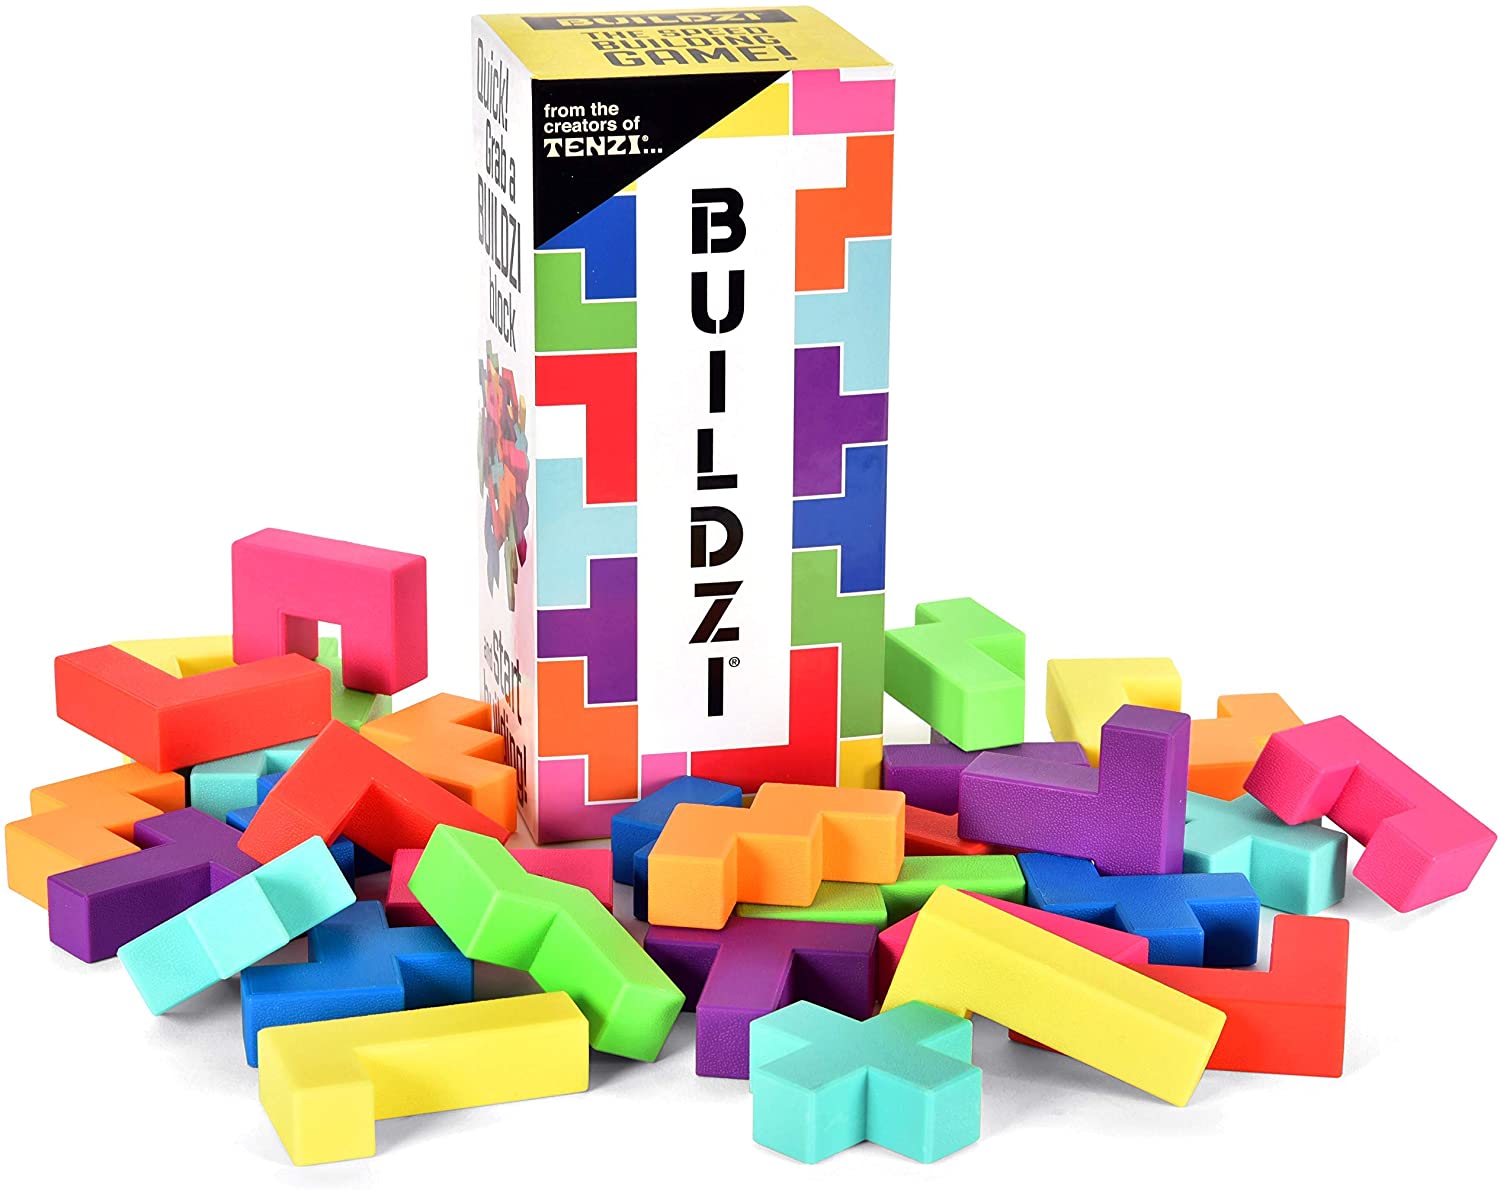 Brightly colored box with 3D Tetris-like pieces strewn out in front of it